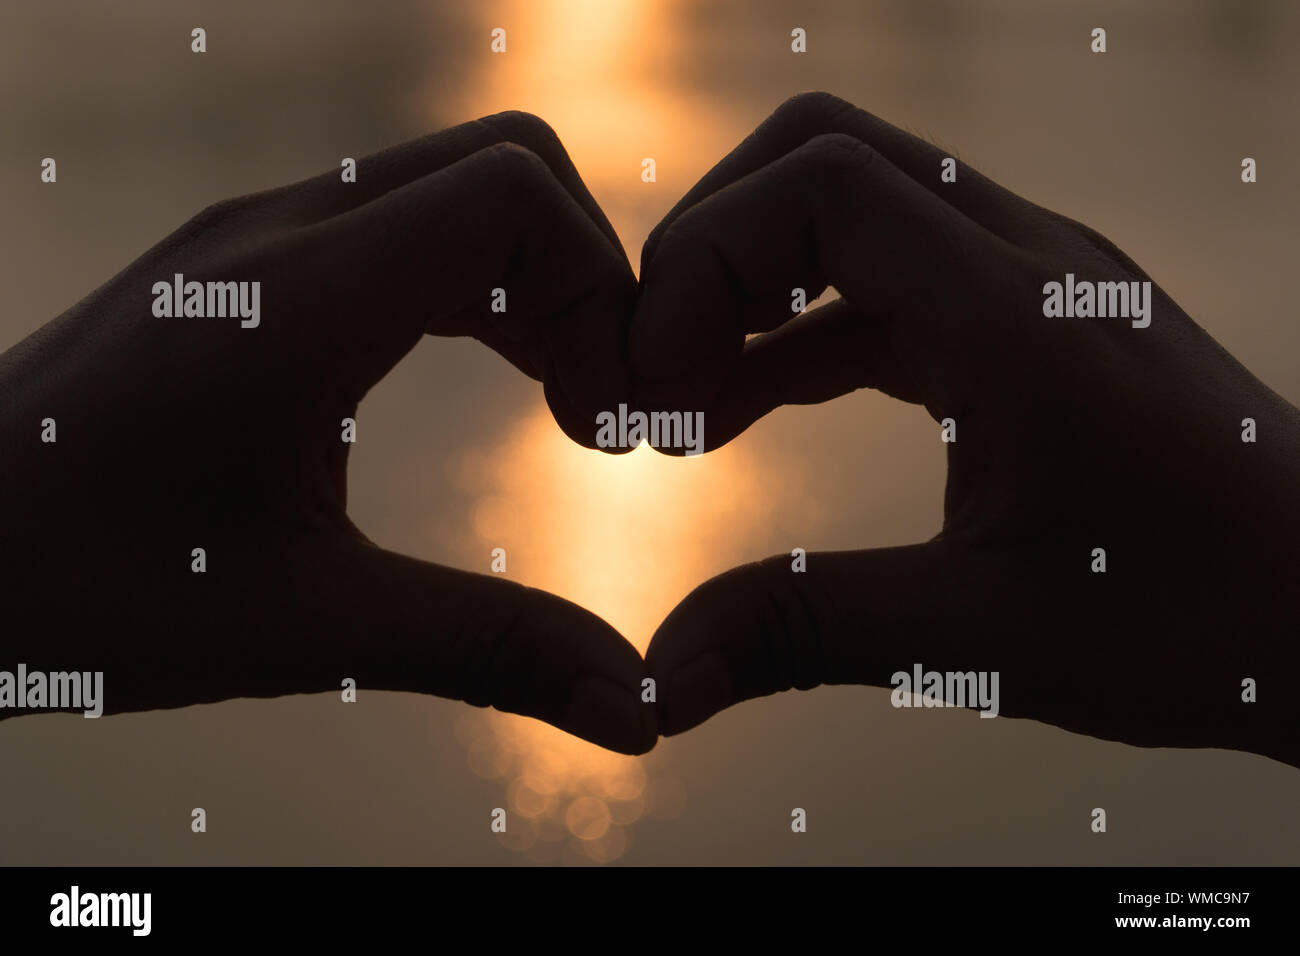 Close-up Of Hands Forming Heart Shape Against Blurred Water Stock Photo